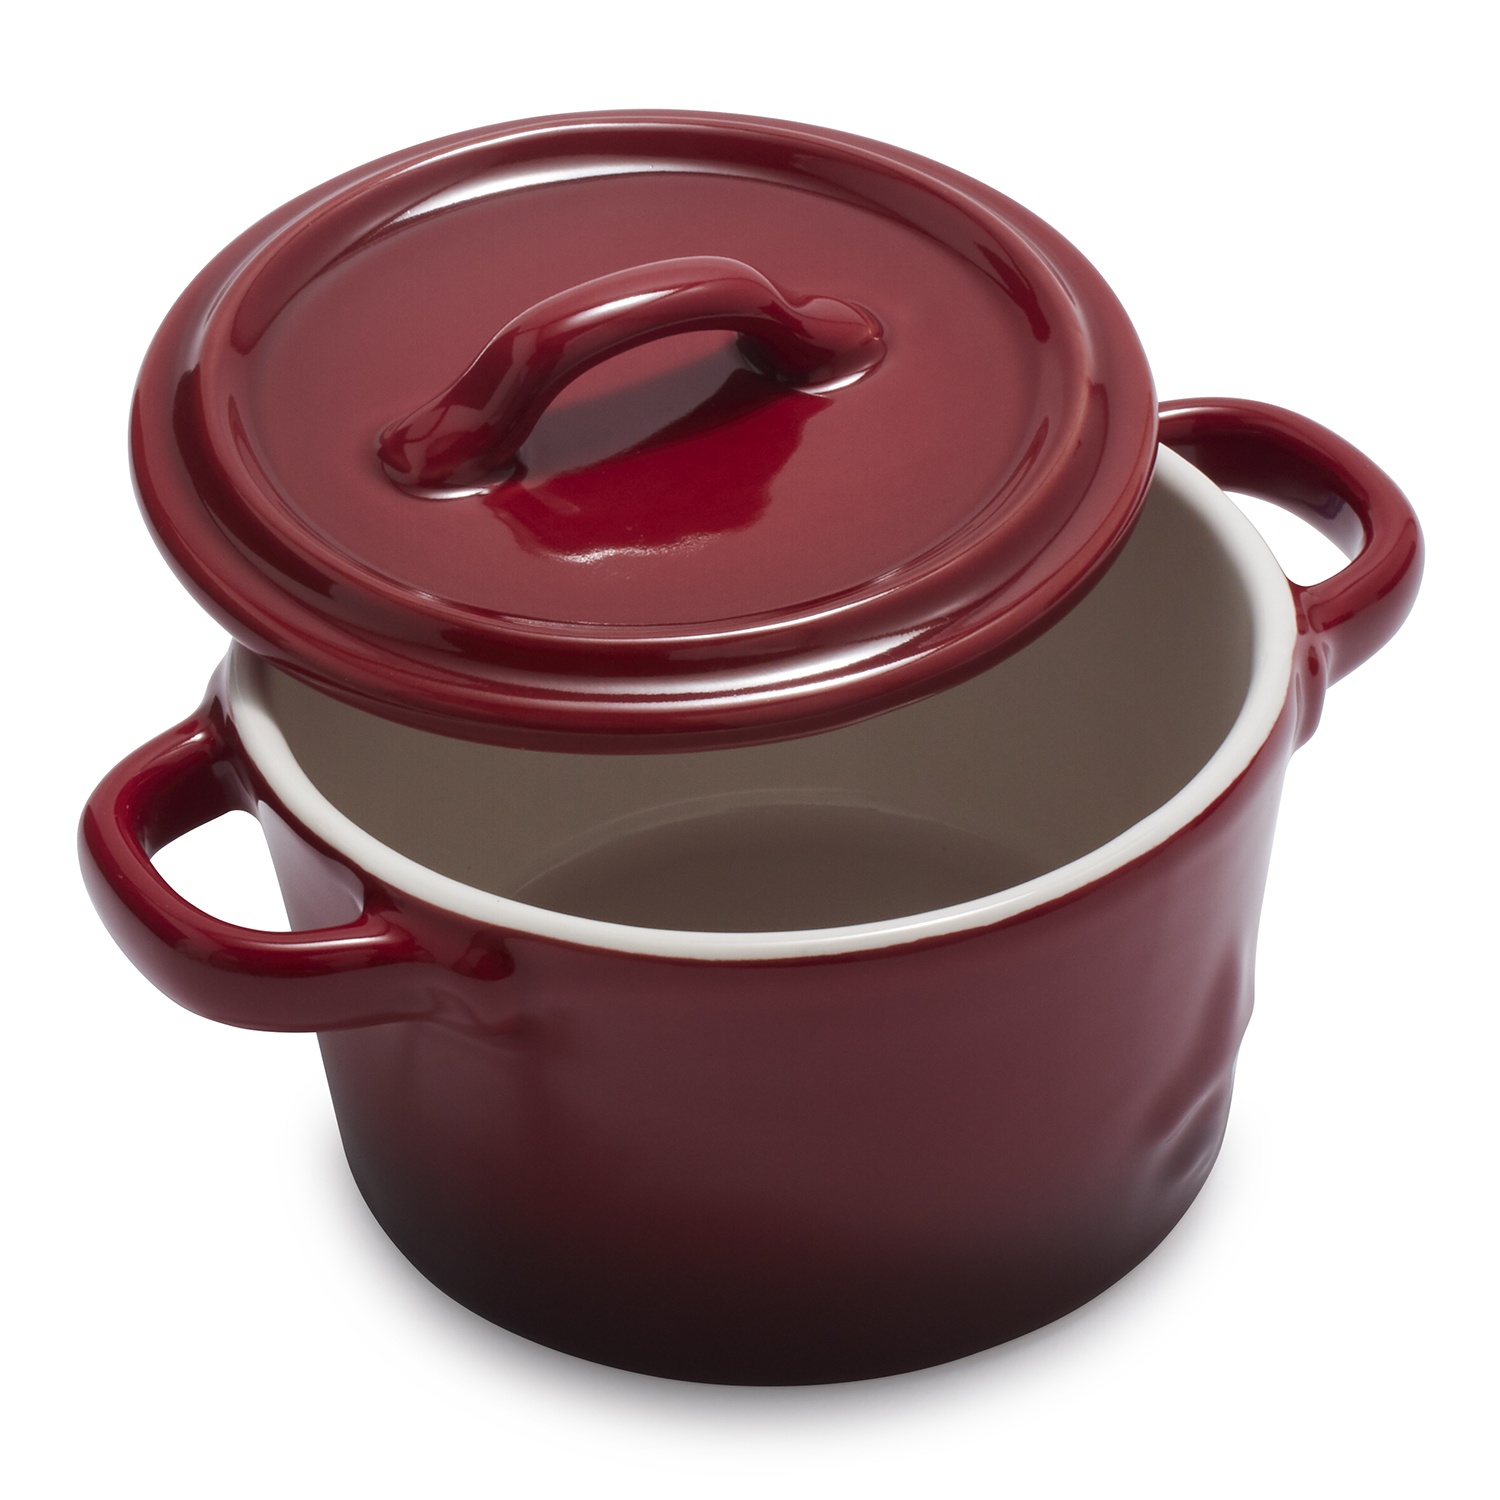 slide 1 of 1, La Marque 84 Oven to Table Round Cocotte, Red, 8 oz